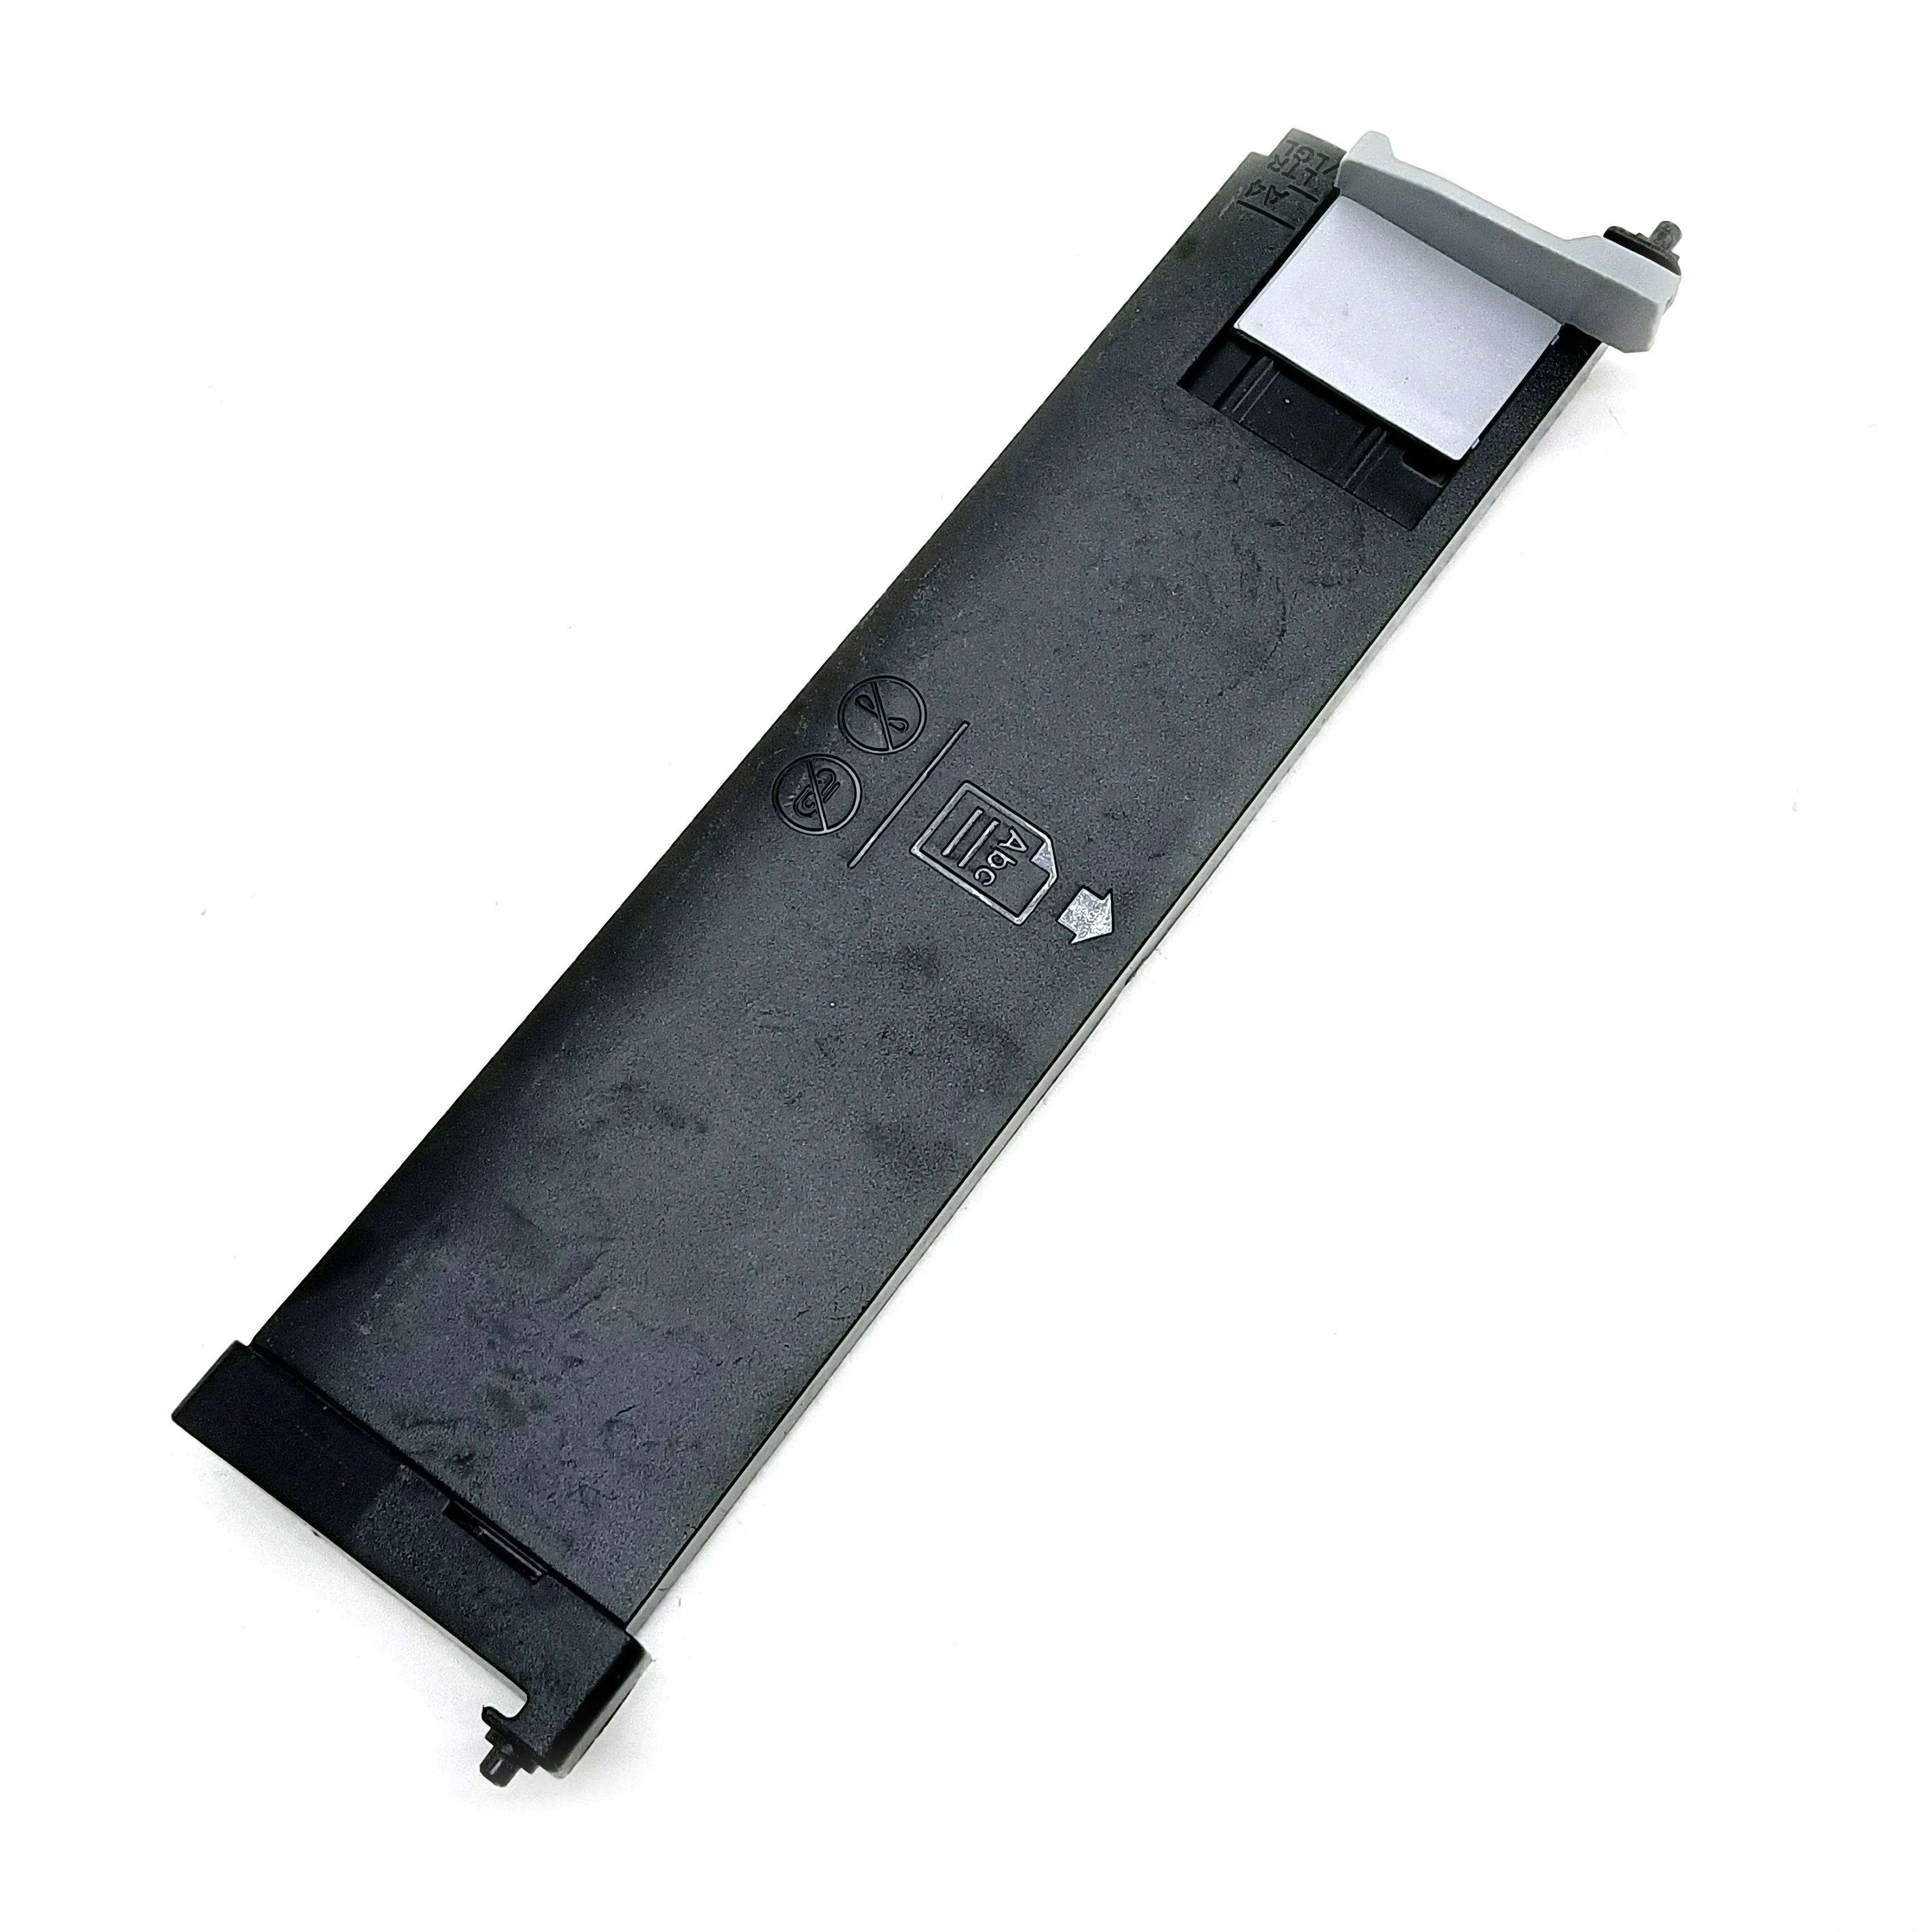 

Paper Tray Fits For Epson XP 830 640 897 810 701 635 800 850 700 721 630 600 601 615 605 821 720 820 750 625 610 620 801